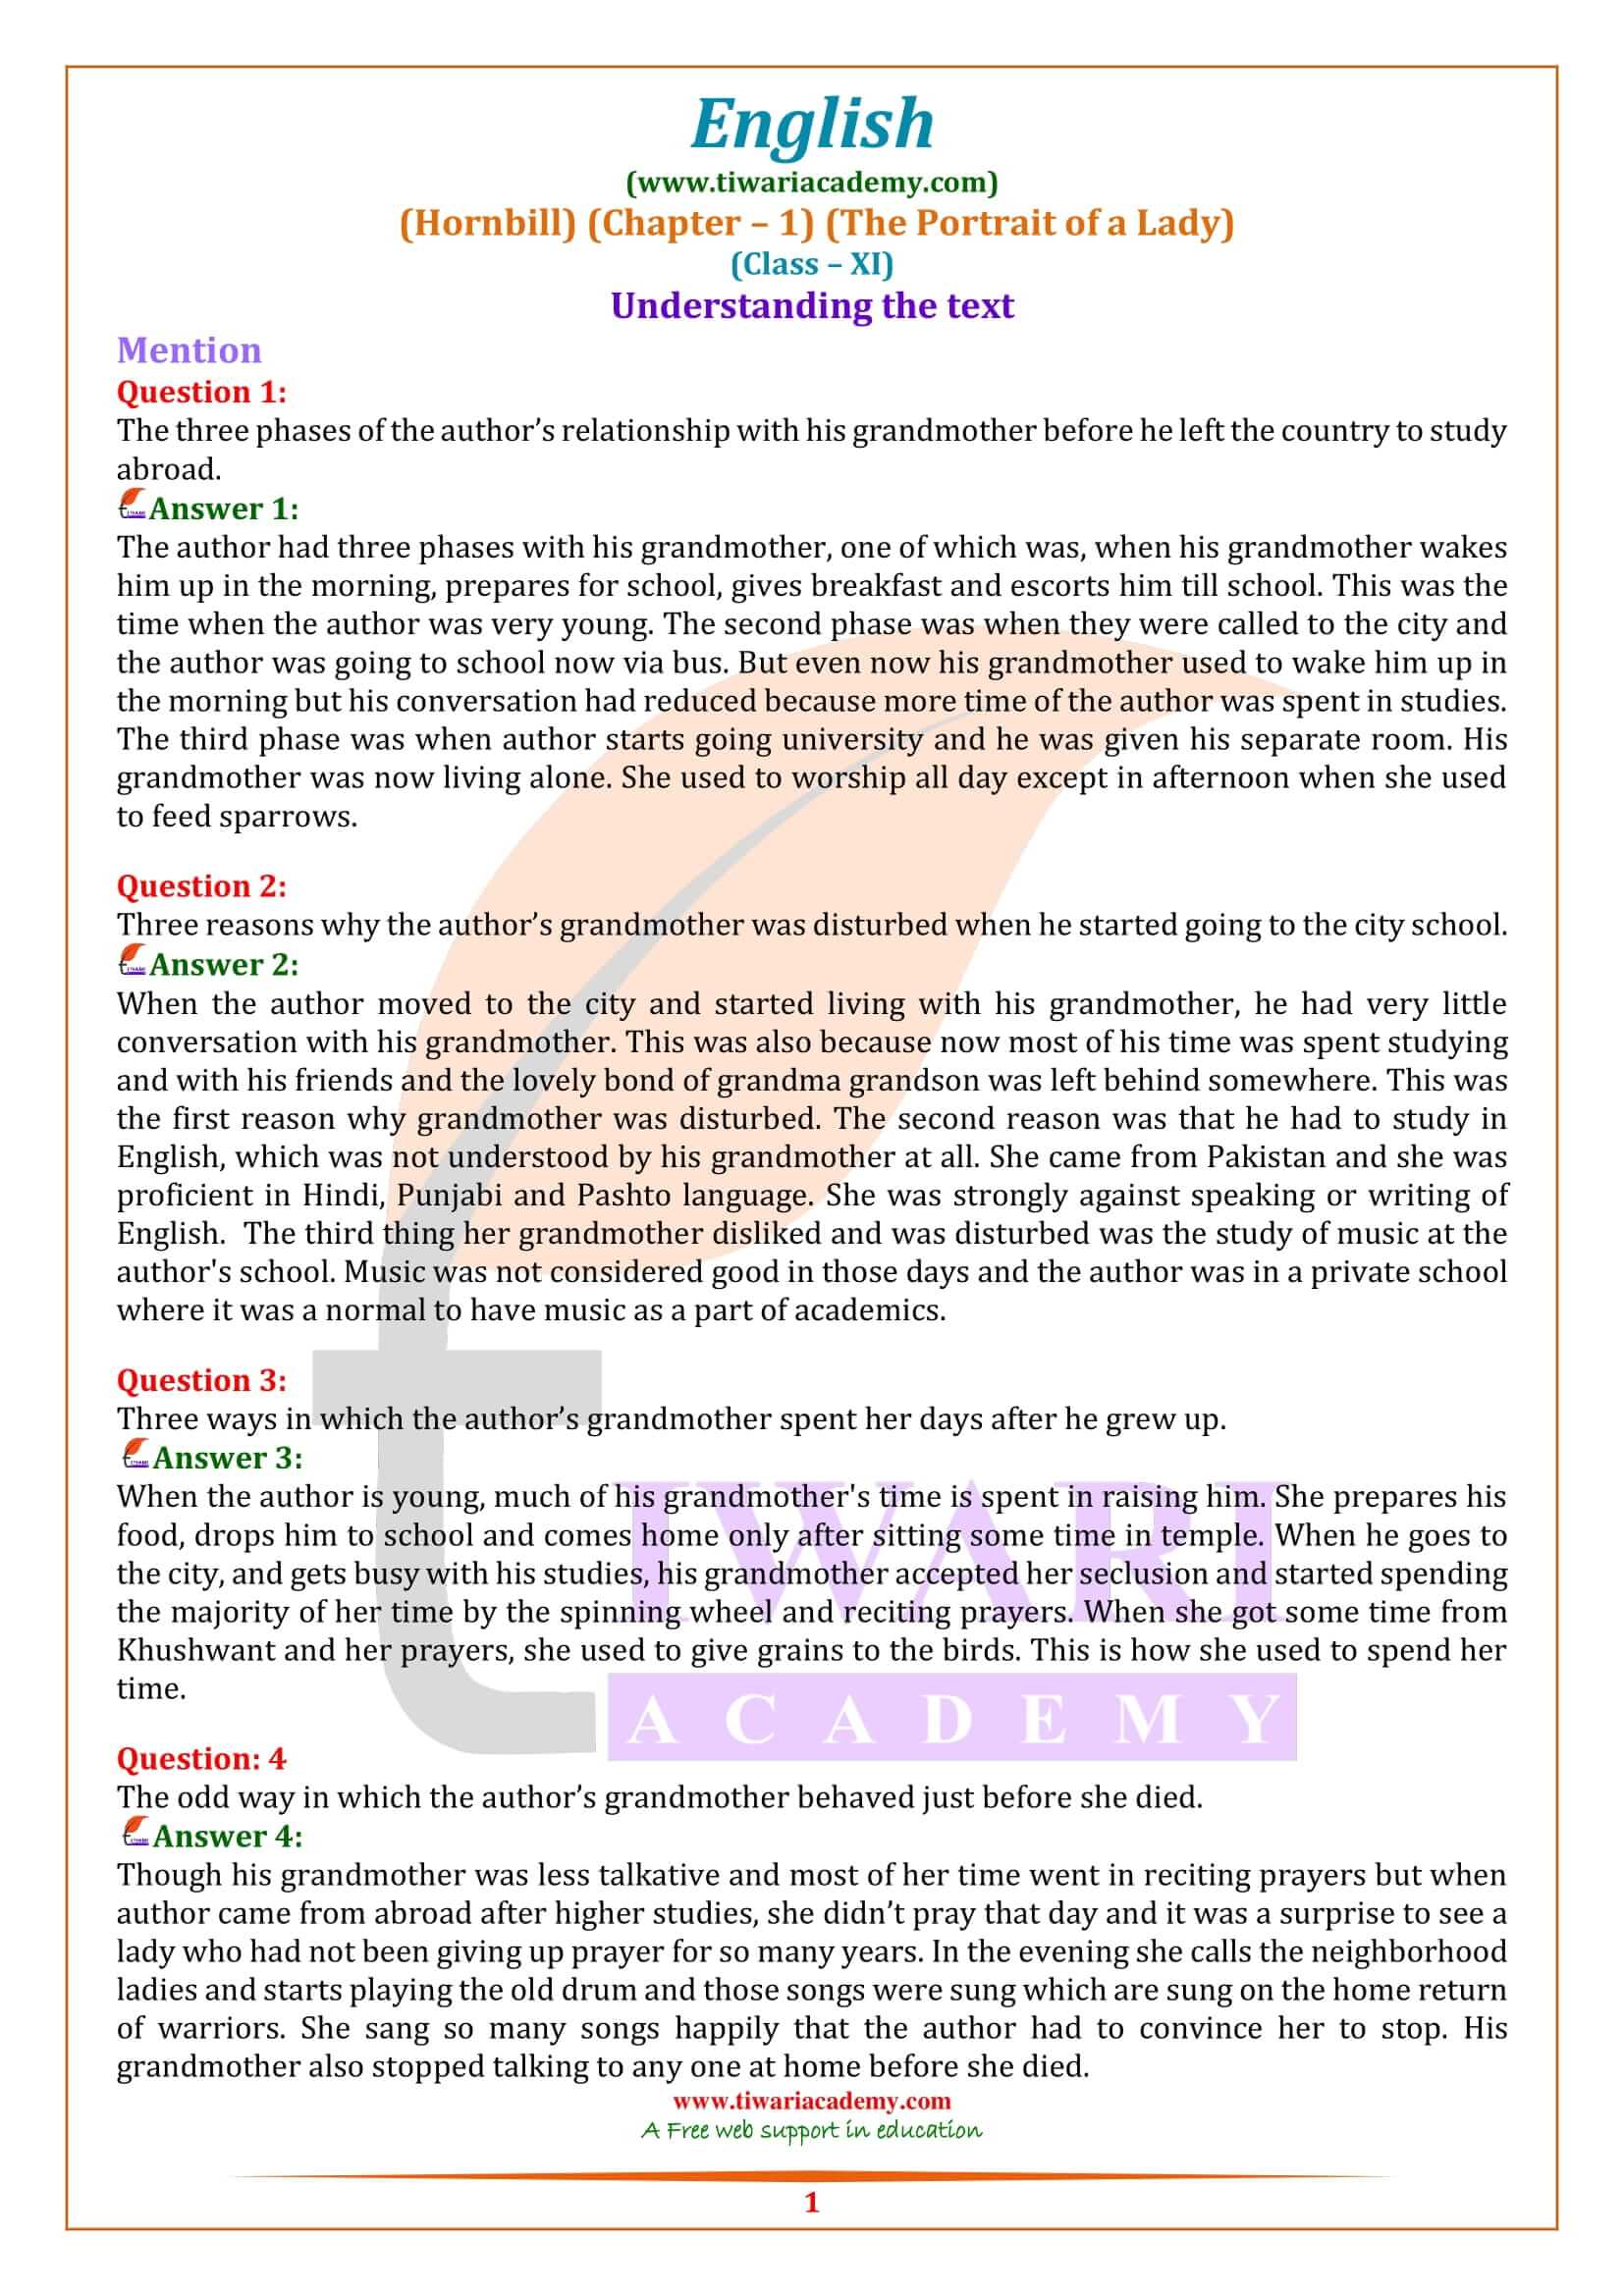 NCERT Solutions for Class 11 English Hornbill Chapter 1 Question Answers